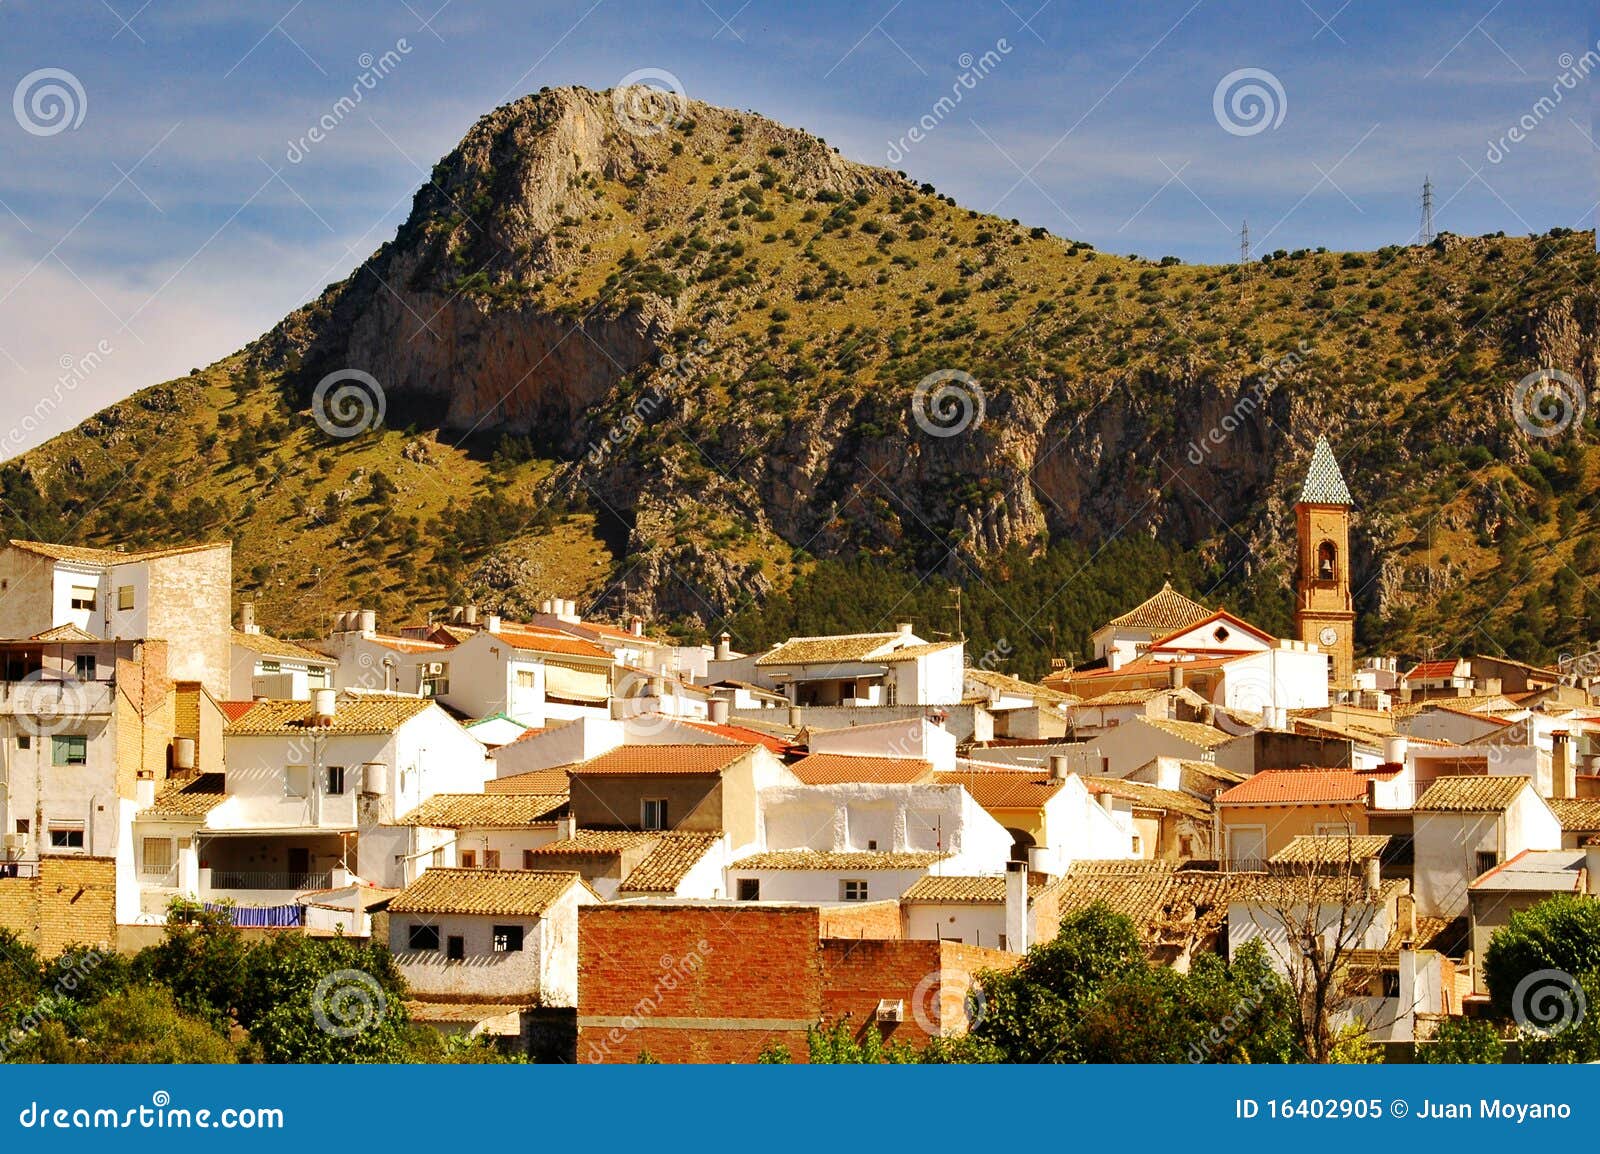 small town in andalusia